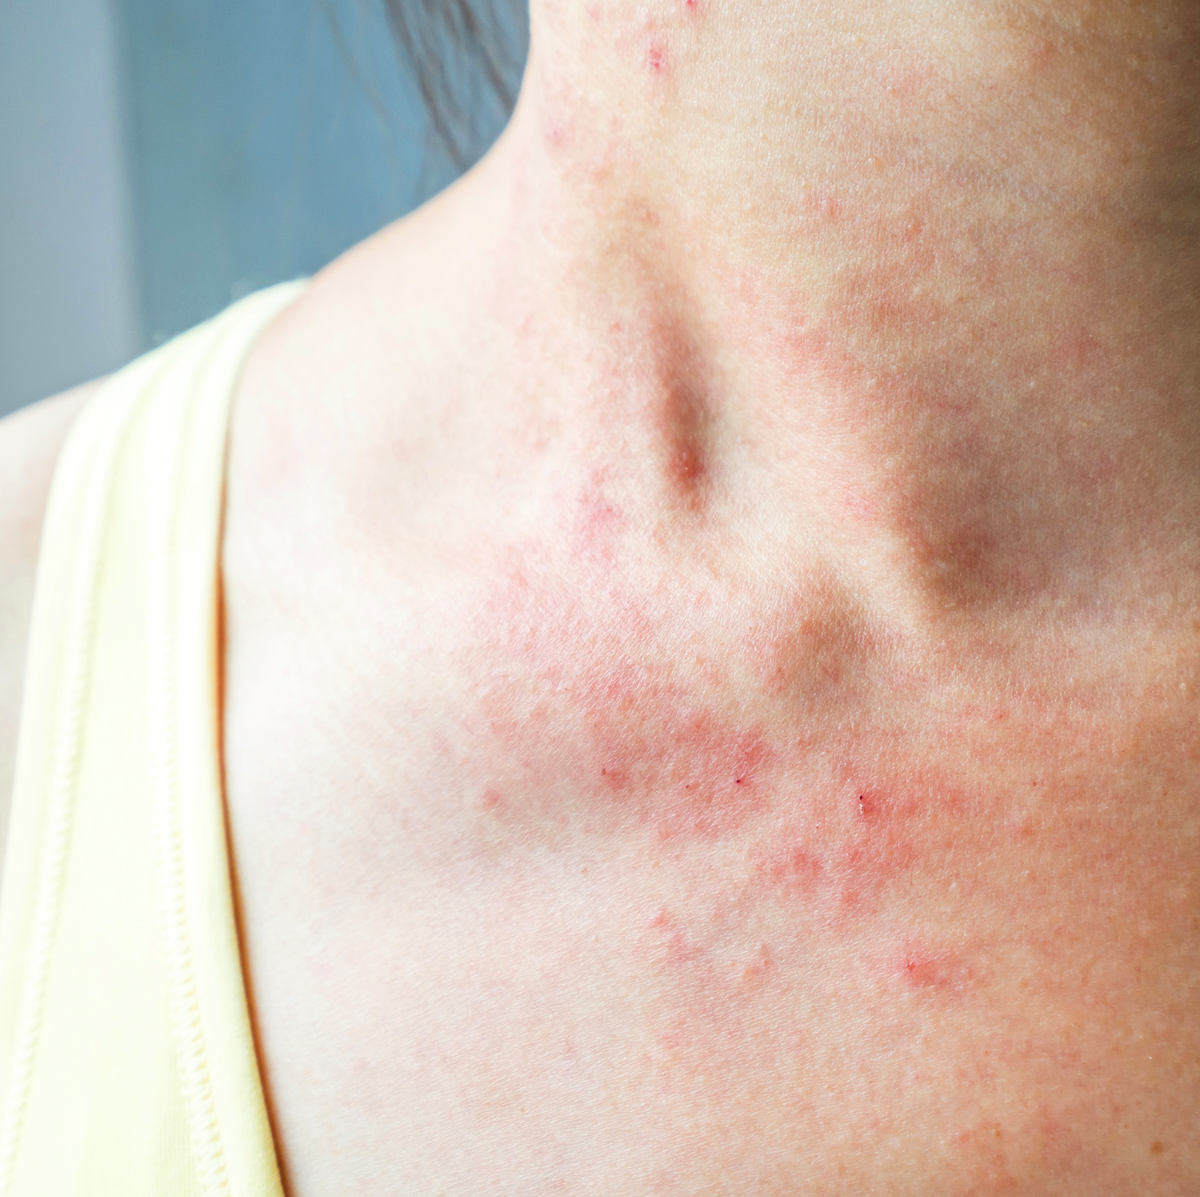 Rash Guide: Causes, Symptoms and Treatment Options